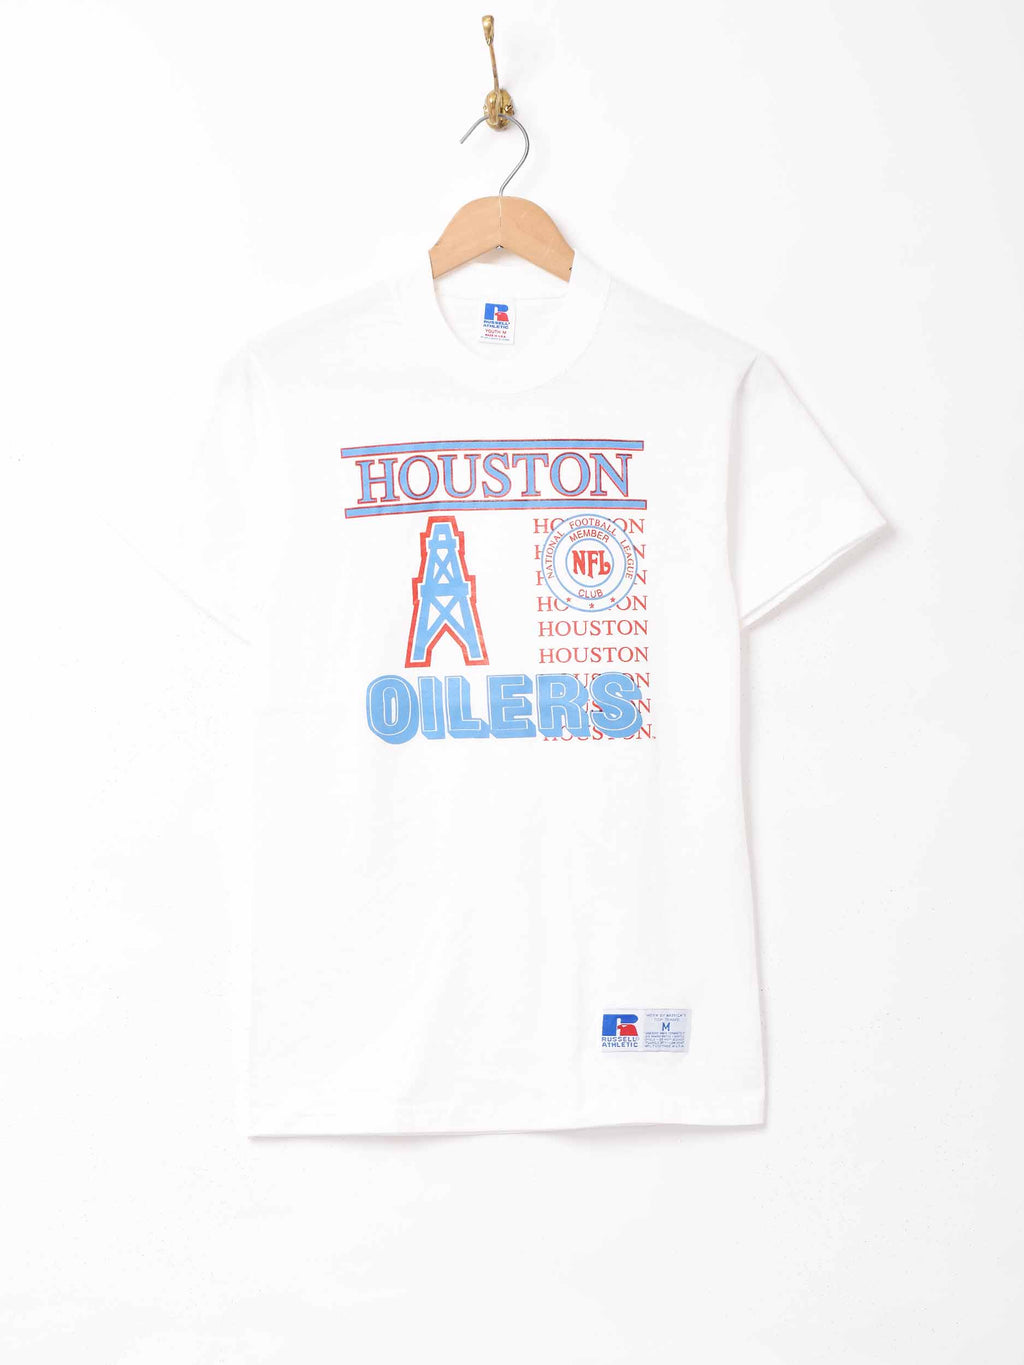 HUSTON OILERS NFLチームロゴプリントTシャツ – 古着屋Top of the Hill